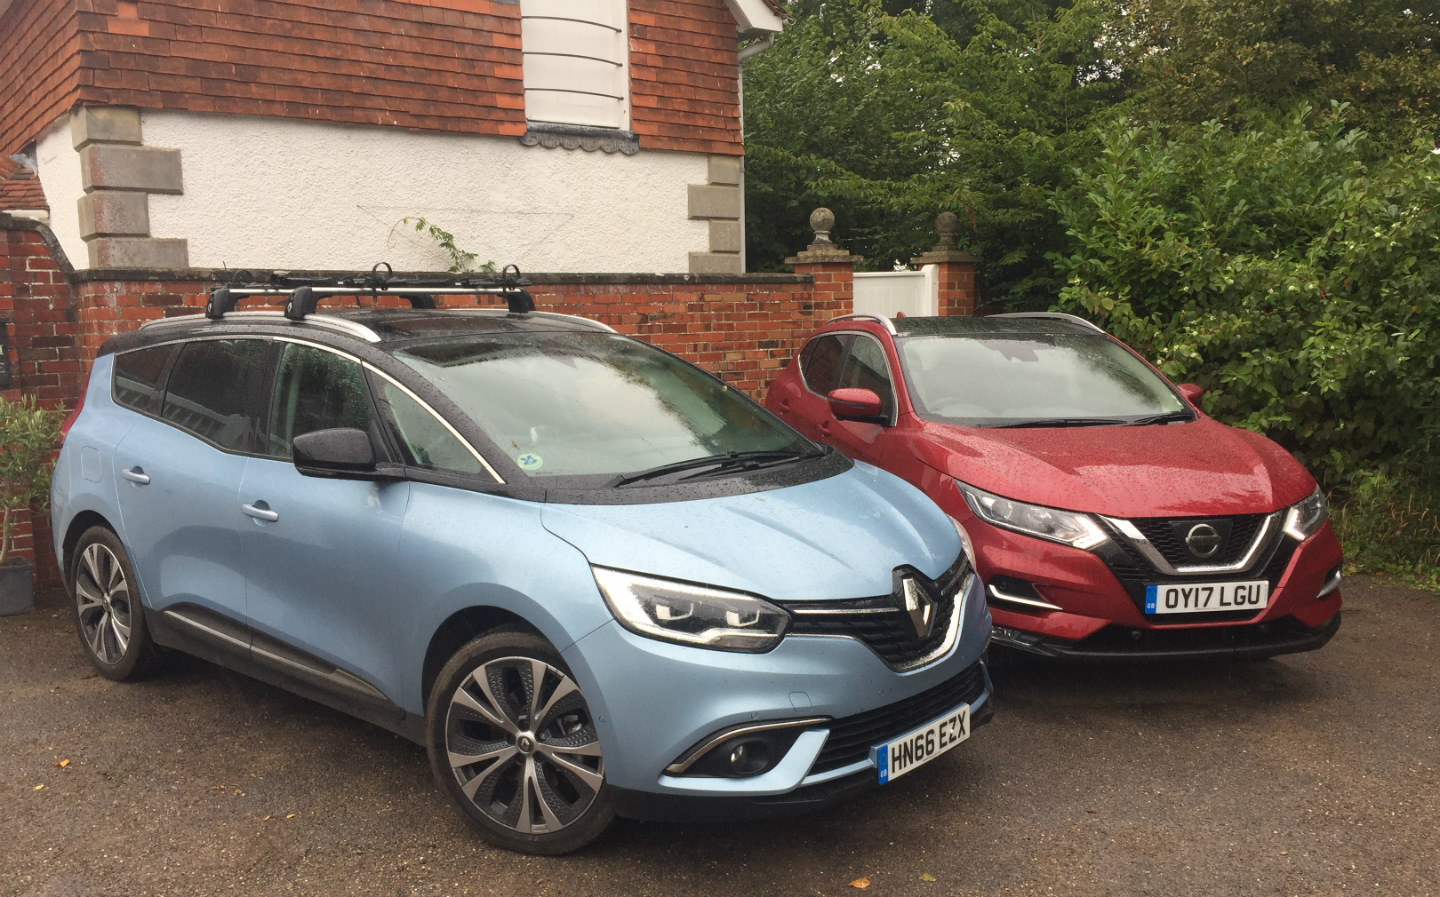 11 September, 2017: How does a Renault Grand Scenic compare with a 2018 Nissan Qashqai?